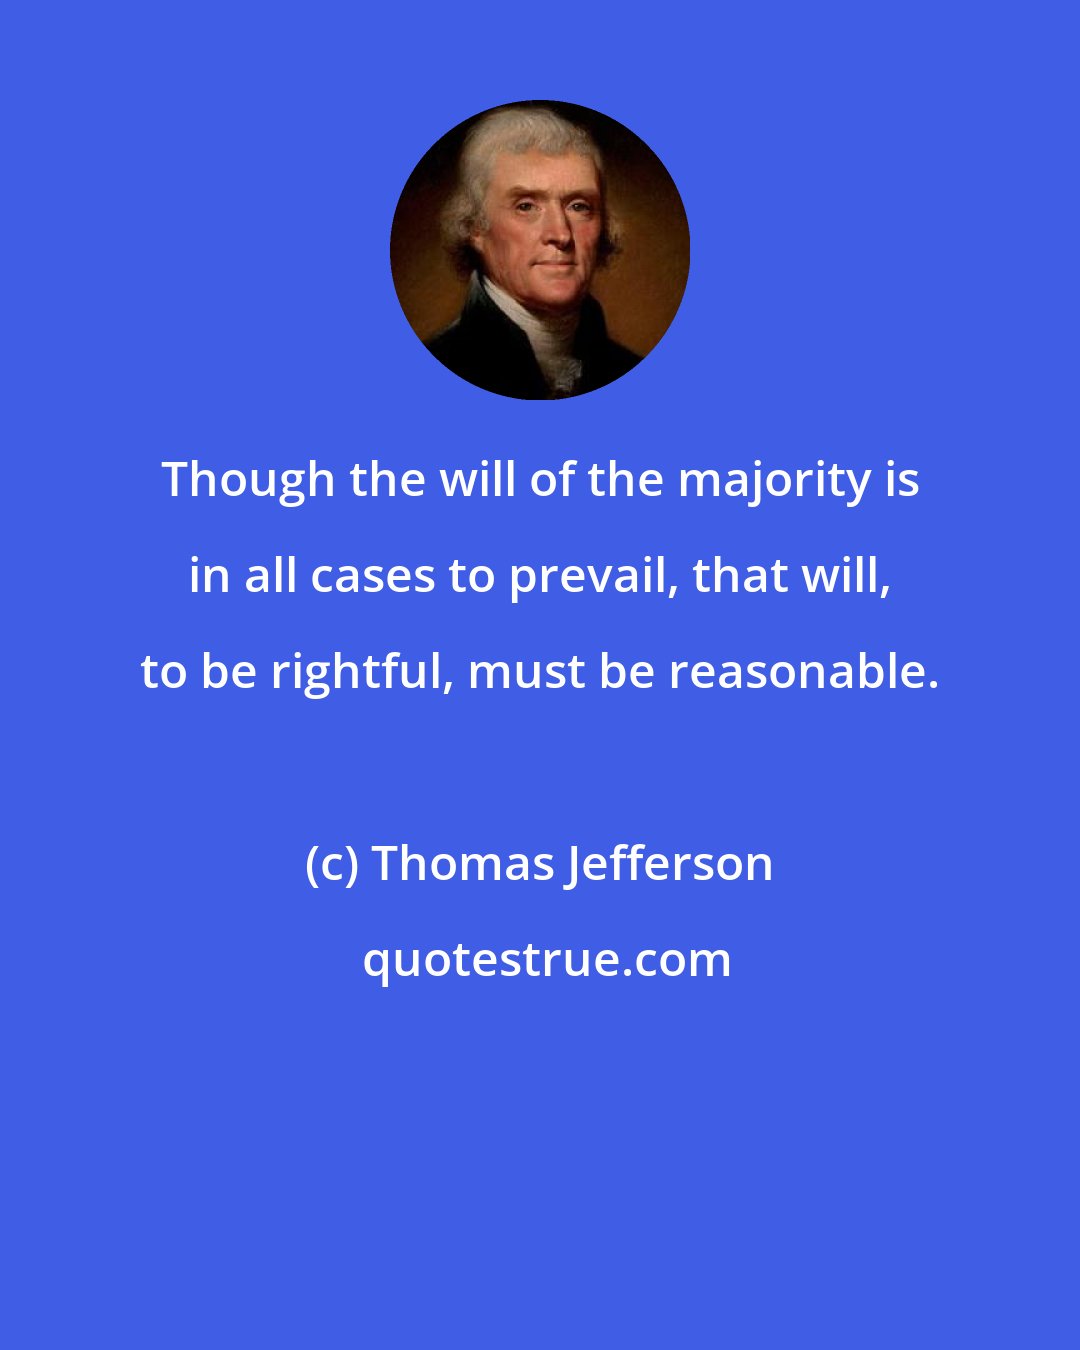 Thomas Jefferson: Though the will of the majority is in all cases to prevail, that will, to be rightful, must be reasonable.